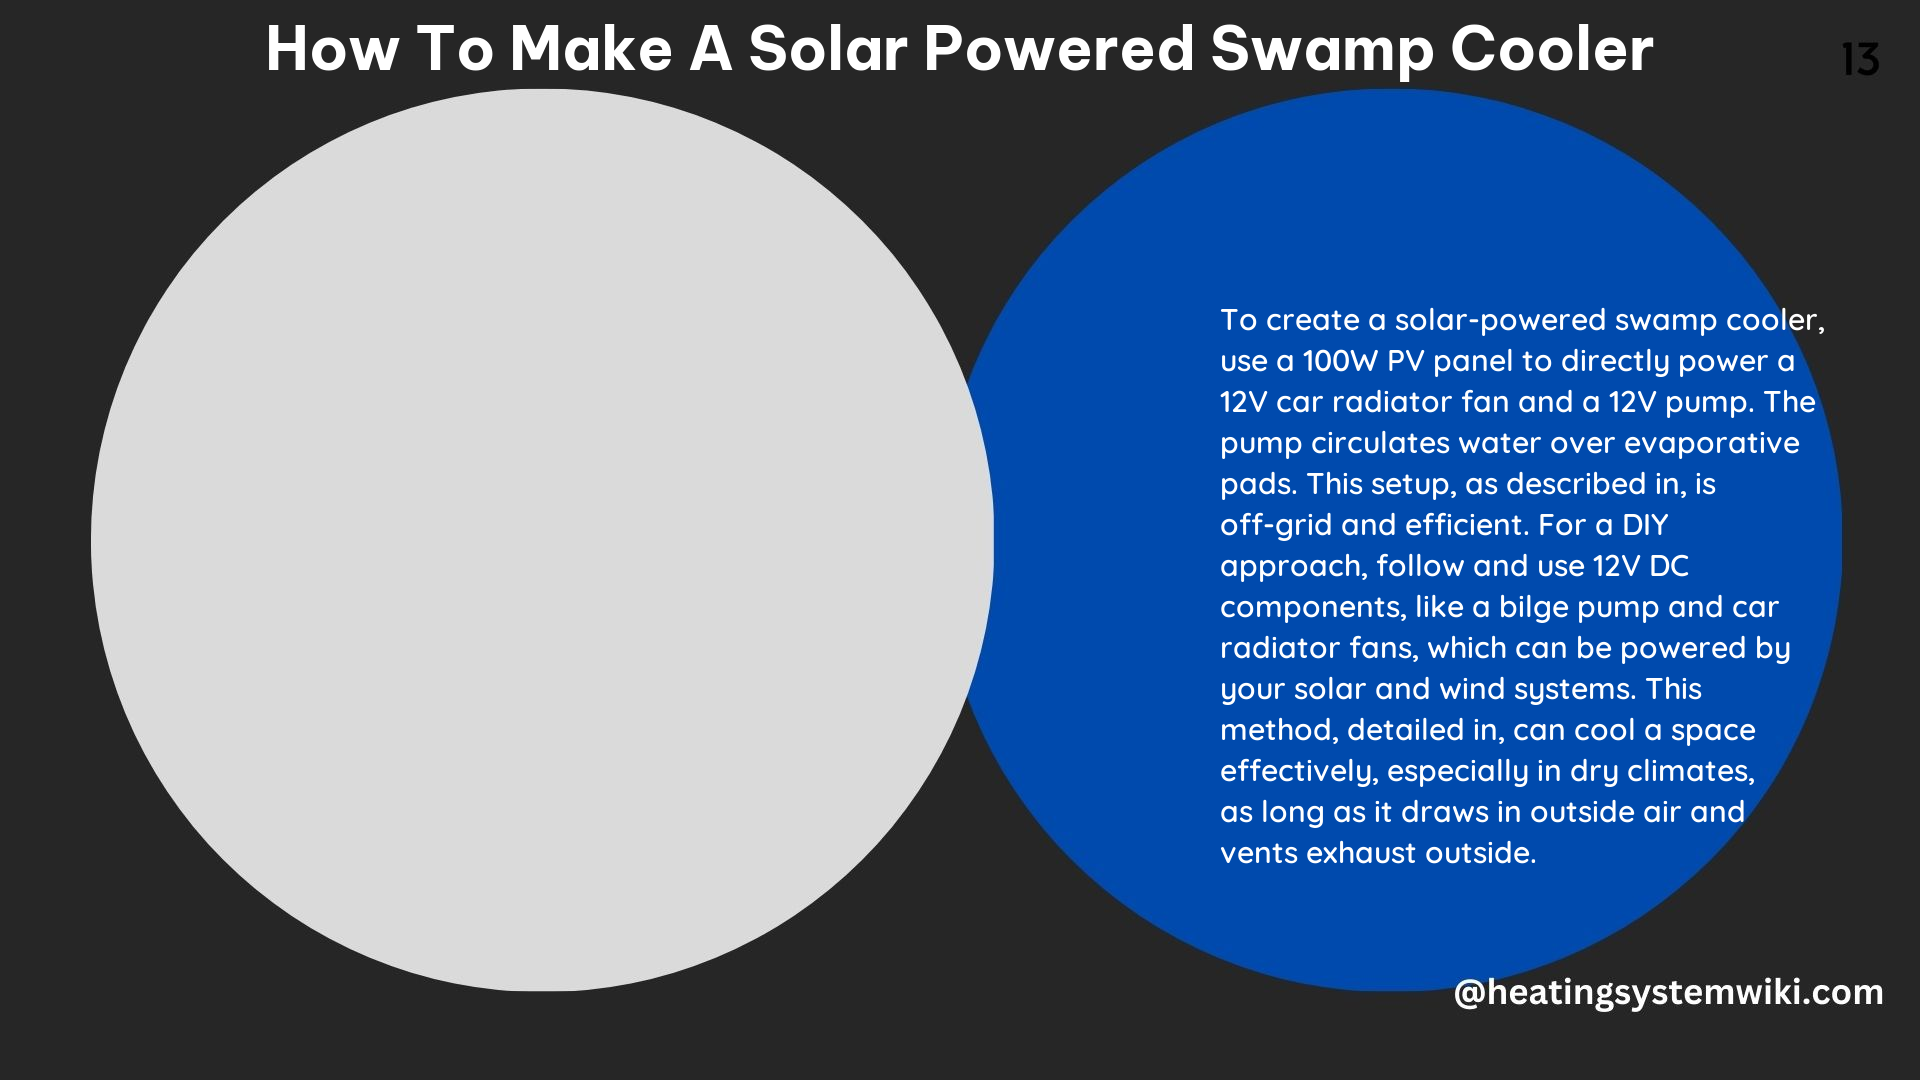 How to Make a Solar Powered Swamp Cooler